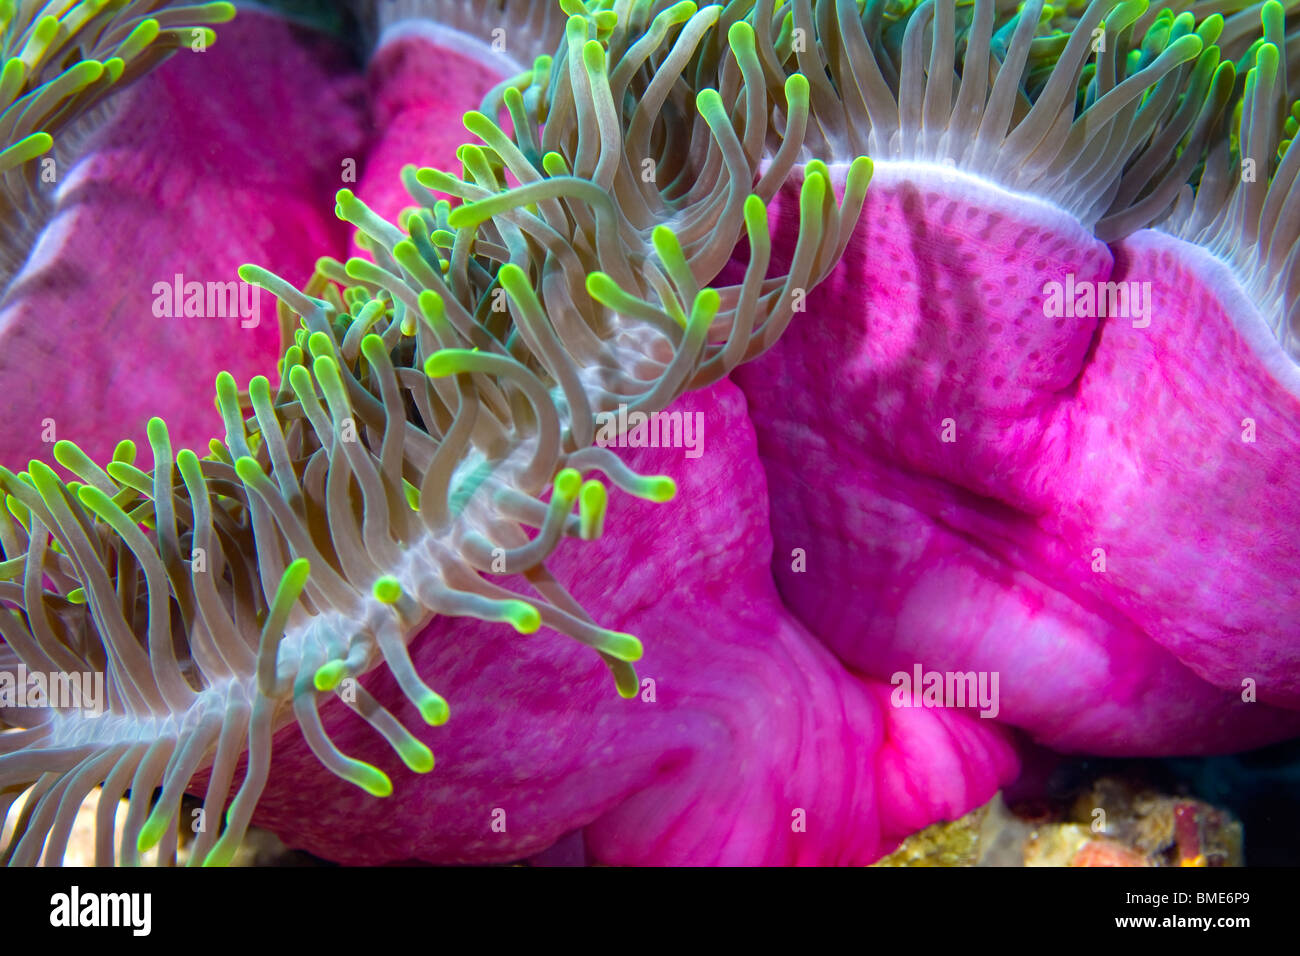 Colorful anemone with green yellow tips and purple underside Stock Photo